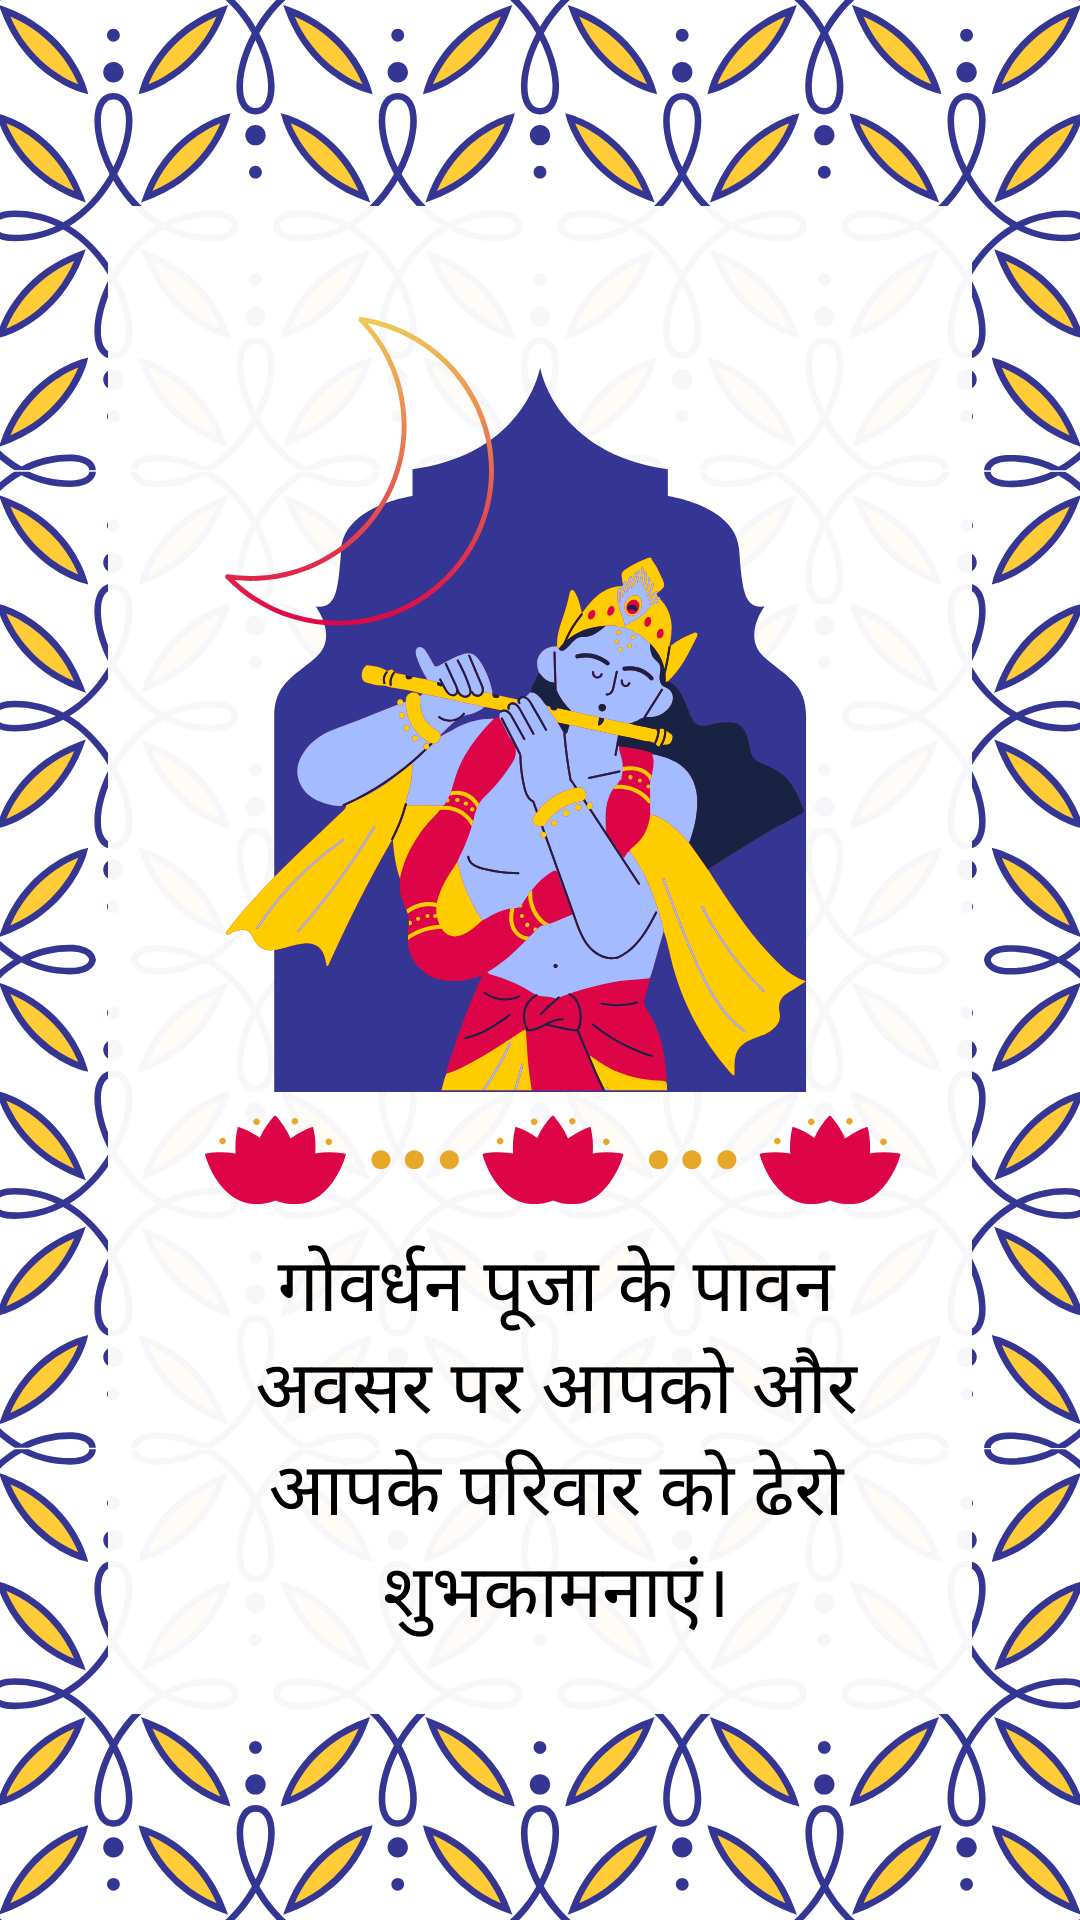 #{"id":2586,"_id":null,"name":"govardahn-puja-status-in-hindi","count":0,"data":null,"deleted_at":null,"created_at":"2023-09-21T12:47:12.000000Z","updated_at":"2023-09-21T12:47:12.000000Z","merge_with":null,"pivot":{"taggable_id":2406,"tag_id":2586,"taggable_type":"App\\Models\\Status"}}, #{"id":2587,"_id":null,"name":"govardhan-puja-wishes-in-hindi","count":0,"data":null,"deleted_at":null,"created_at":"2023-09-21T12:47:12.000000Z","updated_at":"2023-09-21T12:47:12.000000Z","merge_with":null,"pivot":{"taggable_id":2406,"tag_id":2587,"taggable_type":"App\\Models\\Status"}}, #{"id":2588,"_id":null,"name":"govardhan-quotes-in-hindi","count":0,"data":null,"deleted_at":null,"created_at":"2023-09-21T12:47:12.000000Z","updated_at":"2023-09-21T12:47:12.000000Z","merge_with":null,"pivot":{"taggable_id":2406,"tag_id":2588,"taggable_type":"App\\Models\\Status"}}, #{"id":2581,"_id":null,"name":"govardhan-puja-2023-wishes","count":0,"data":null,"deleted_at":null,"created_at":"2023-09-21T12:40:01.000000Z","updated_at":"2023-09-21T12:40:01.000000Z","merge_with":null,"pivot":{"taggable_id":2406,"tag_id":2581,"taggable_type":"App\\Models\\Status"}}